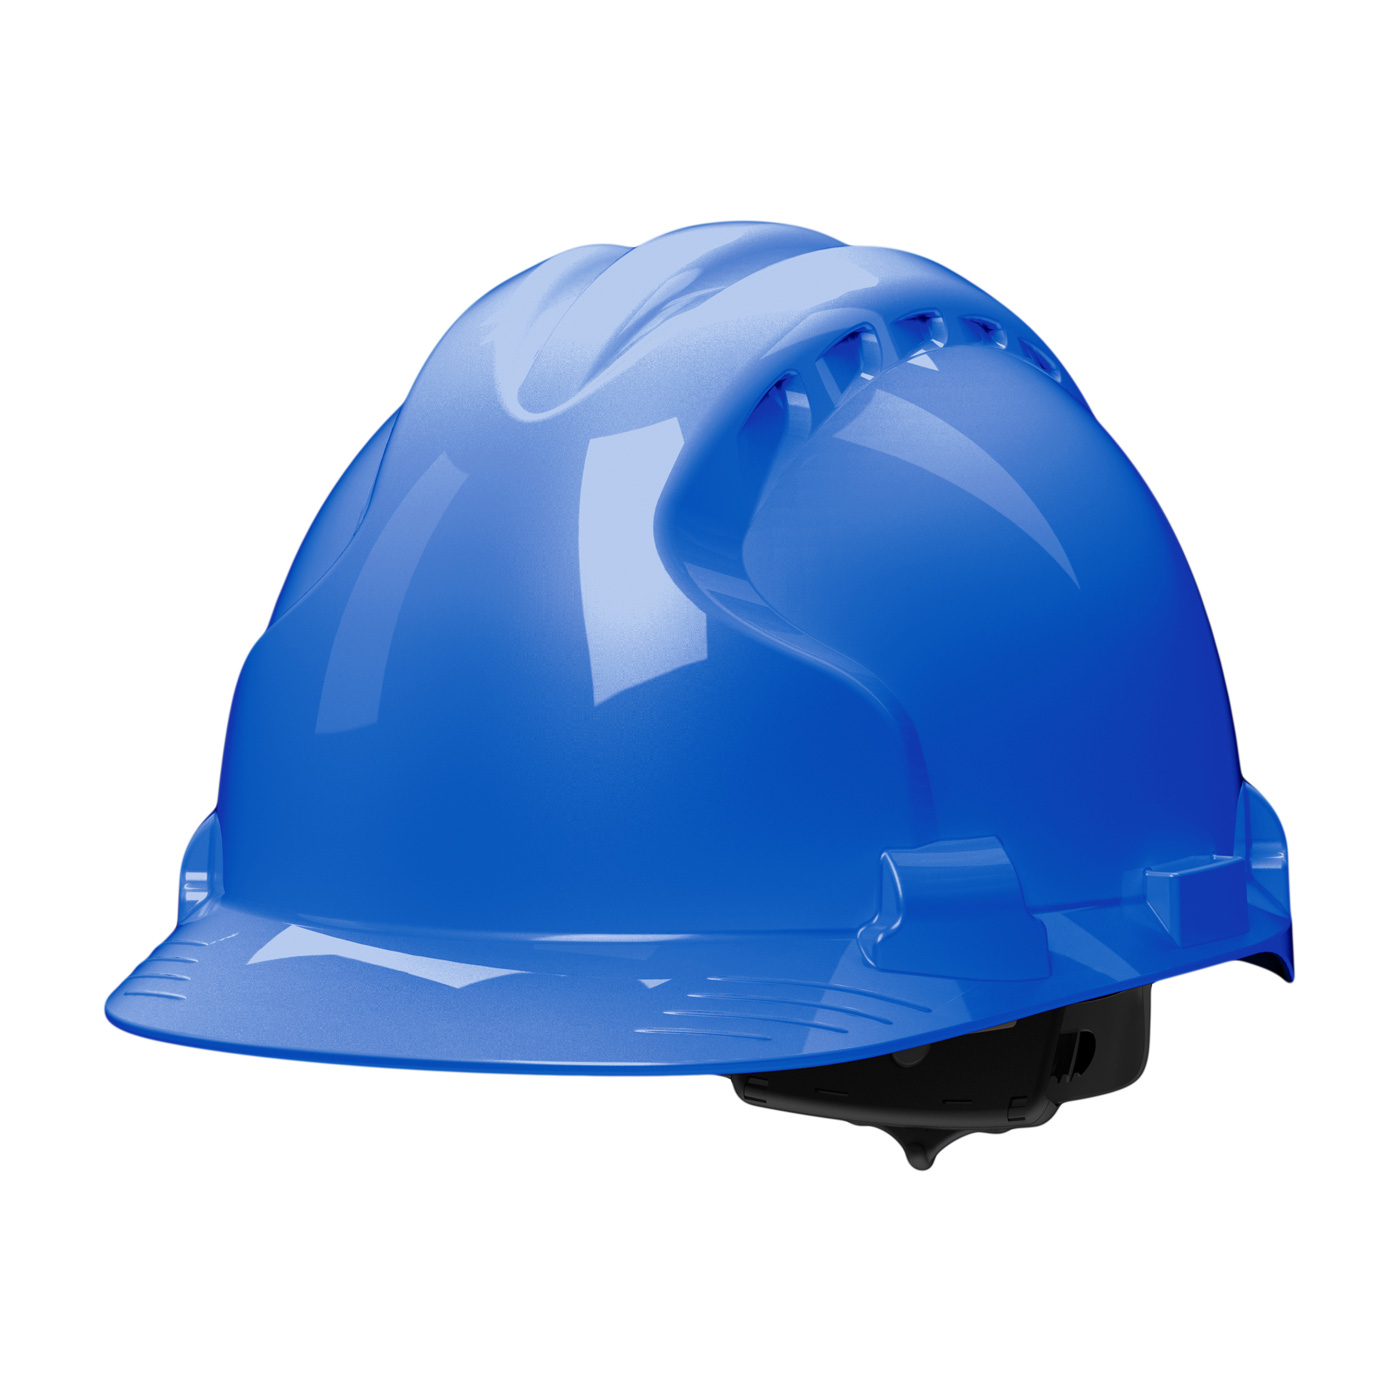 TYPE II HARD HAT WITH HDPE SHELL, EPS IMPACT LINER, POLYESTER SUSPENSION AND WHEEL RATCHET ADJUSTMENT